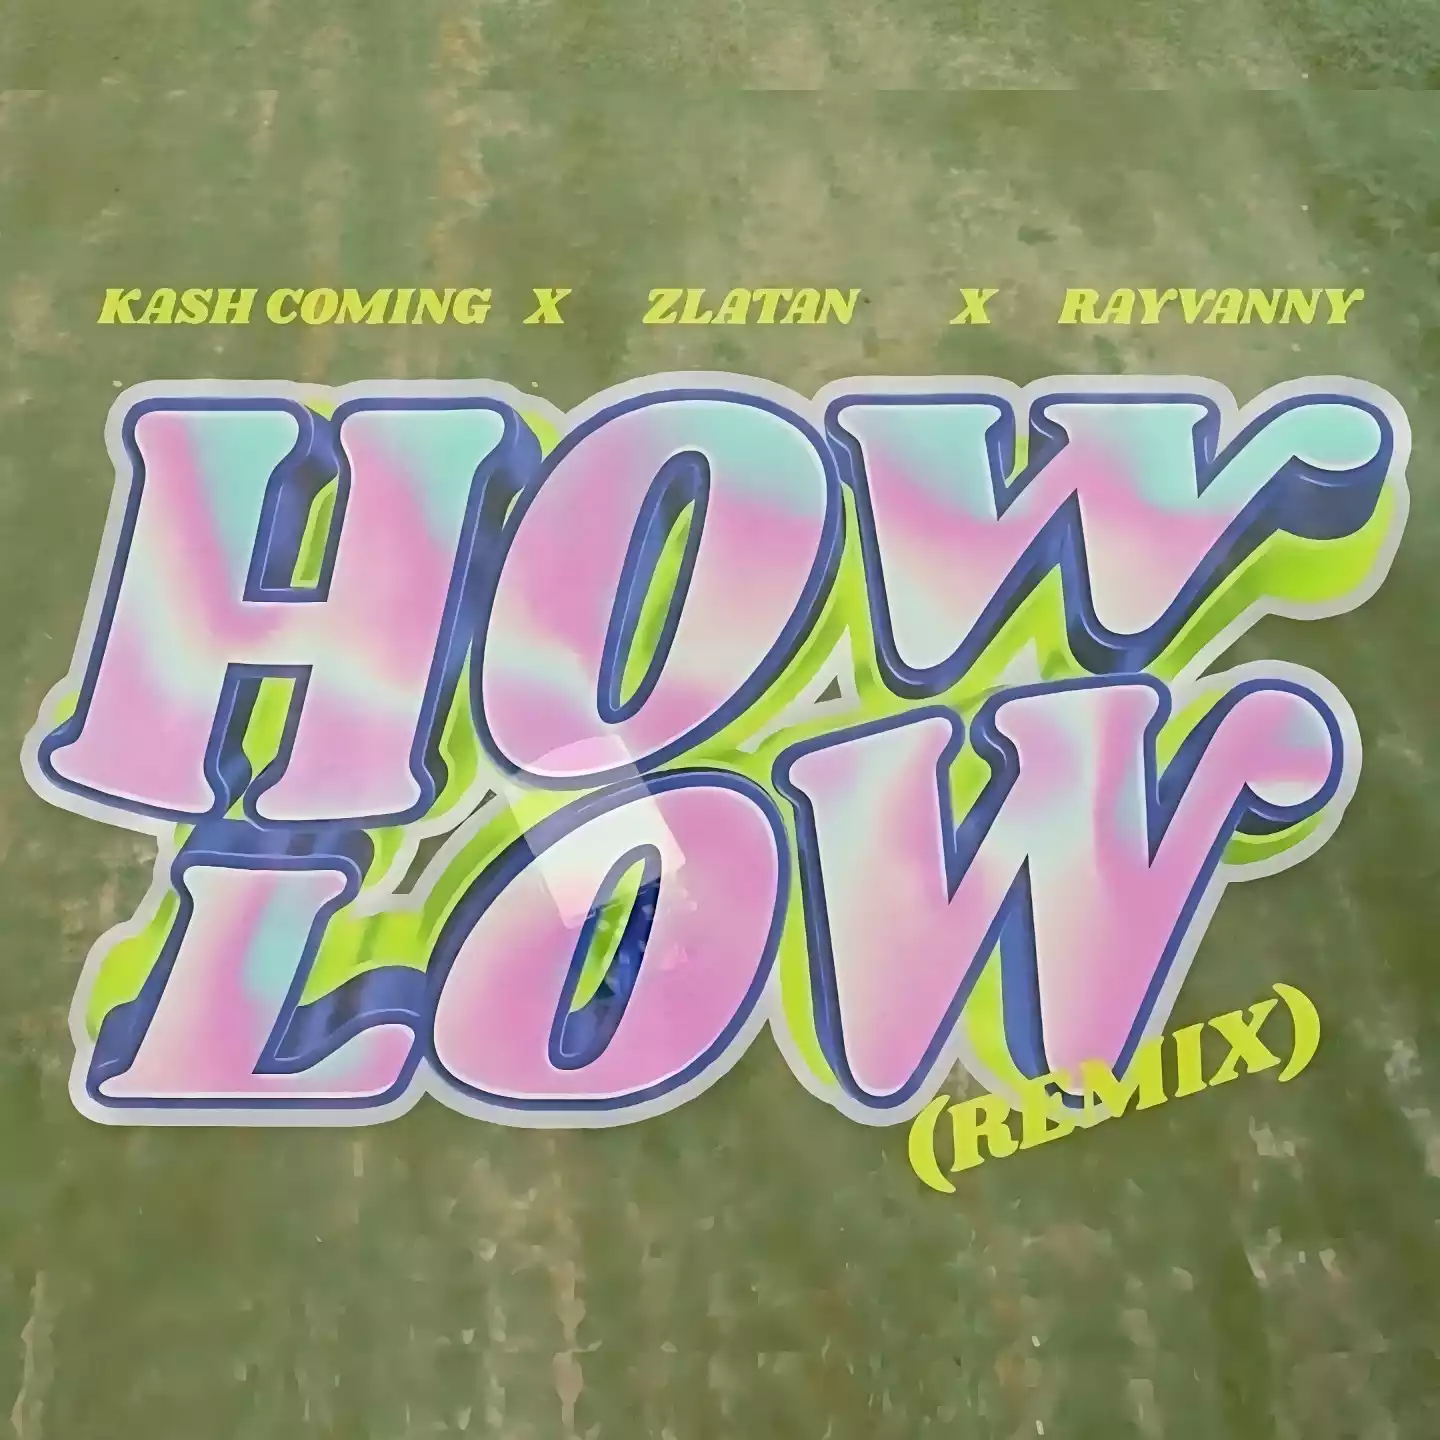 Kashcoming ft Zlatan & Rayvanny - How Low (Remix) Mp3 Download